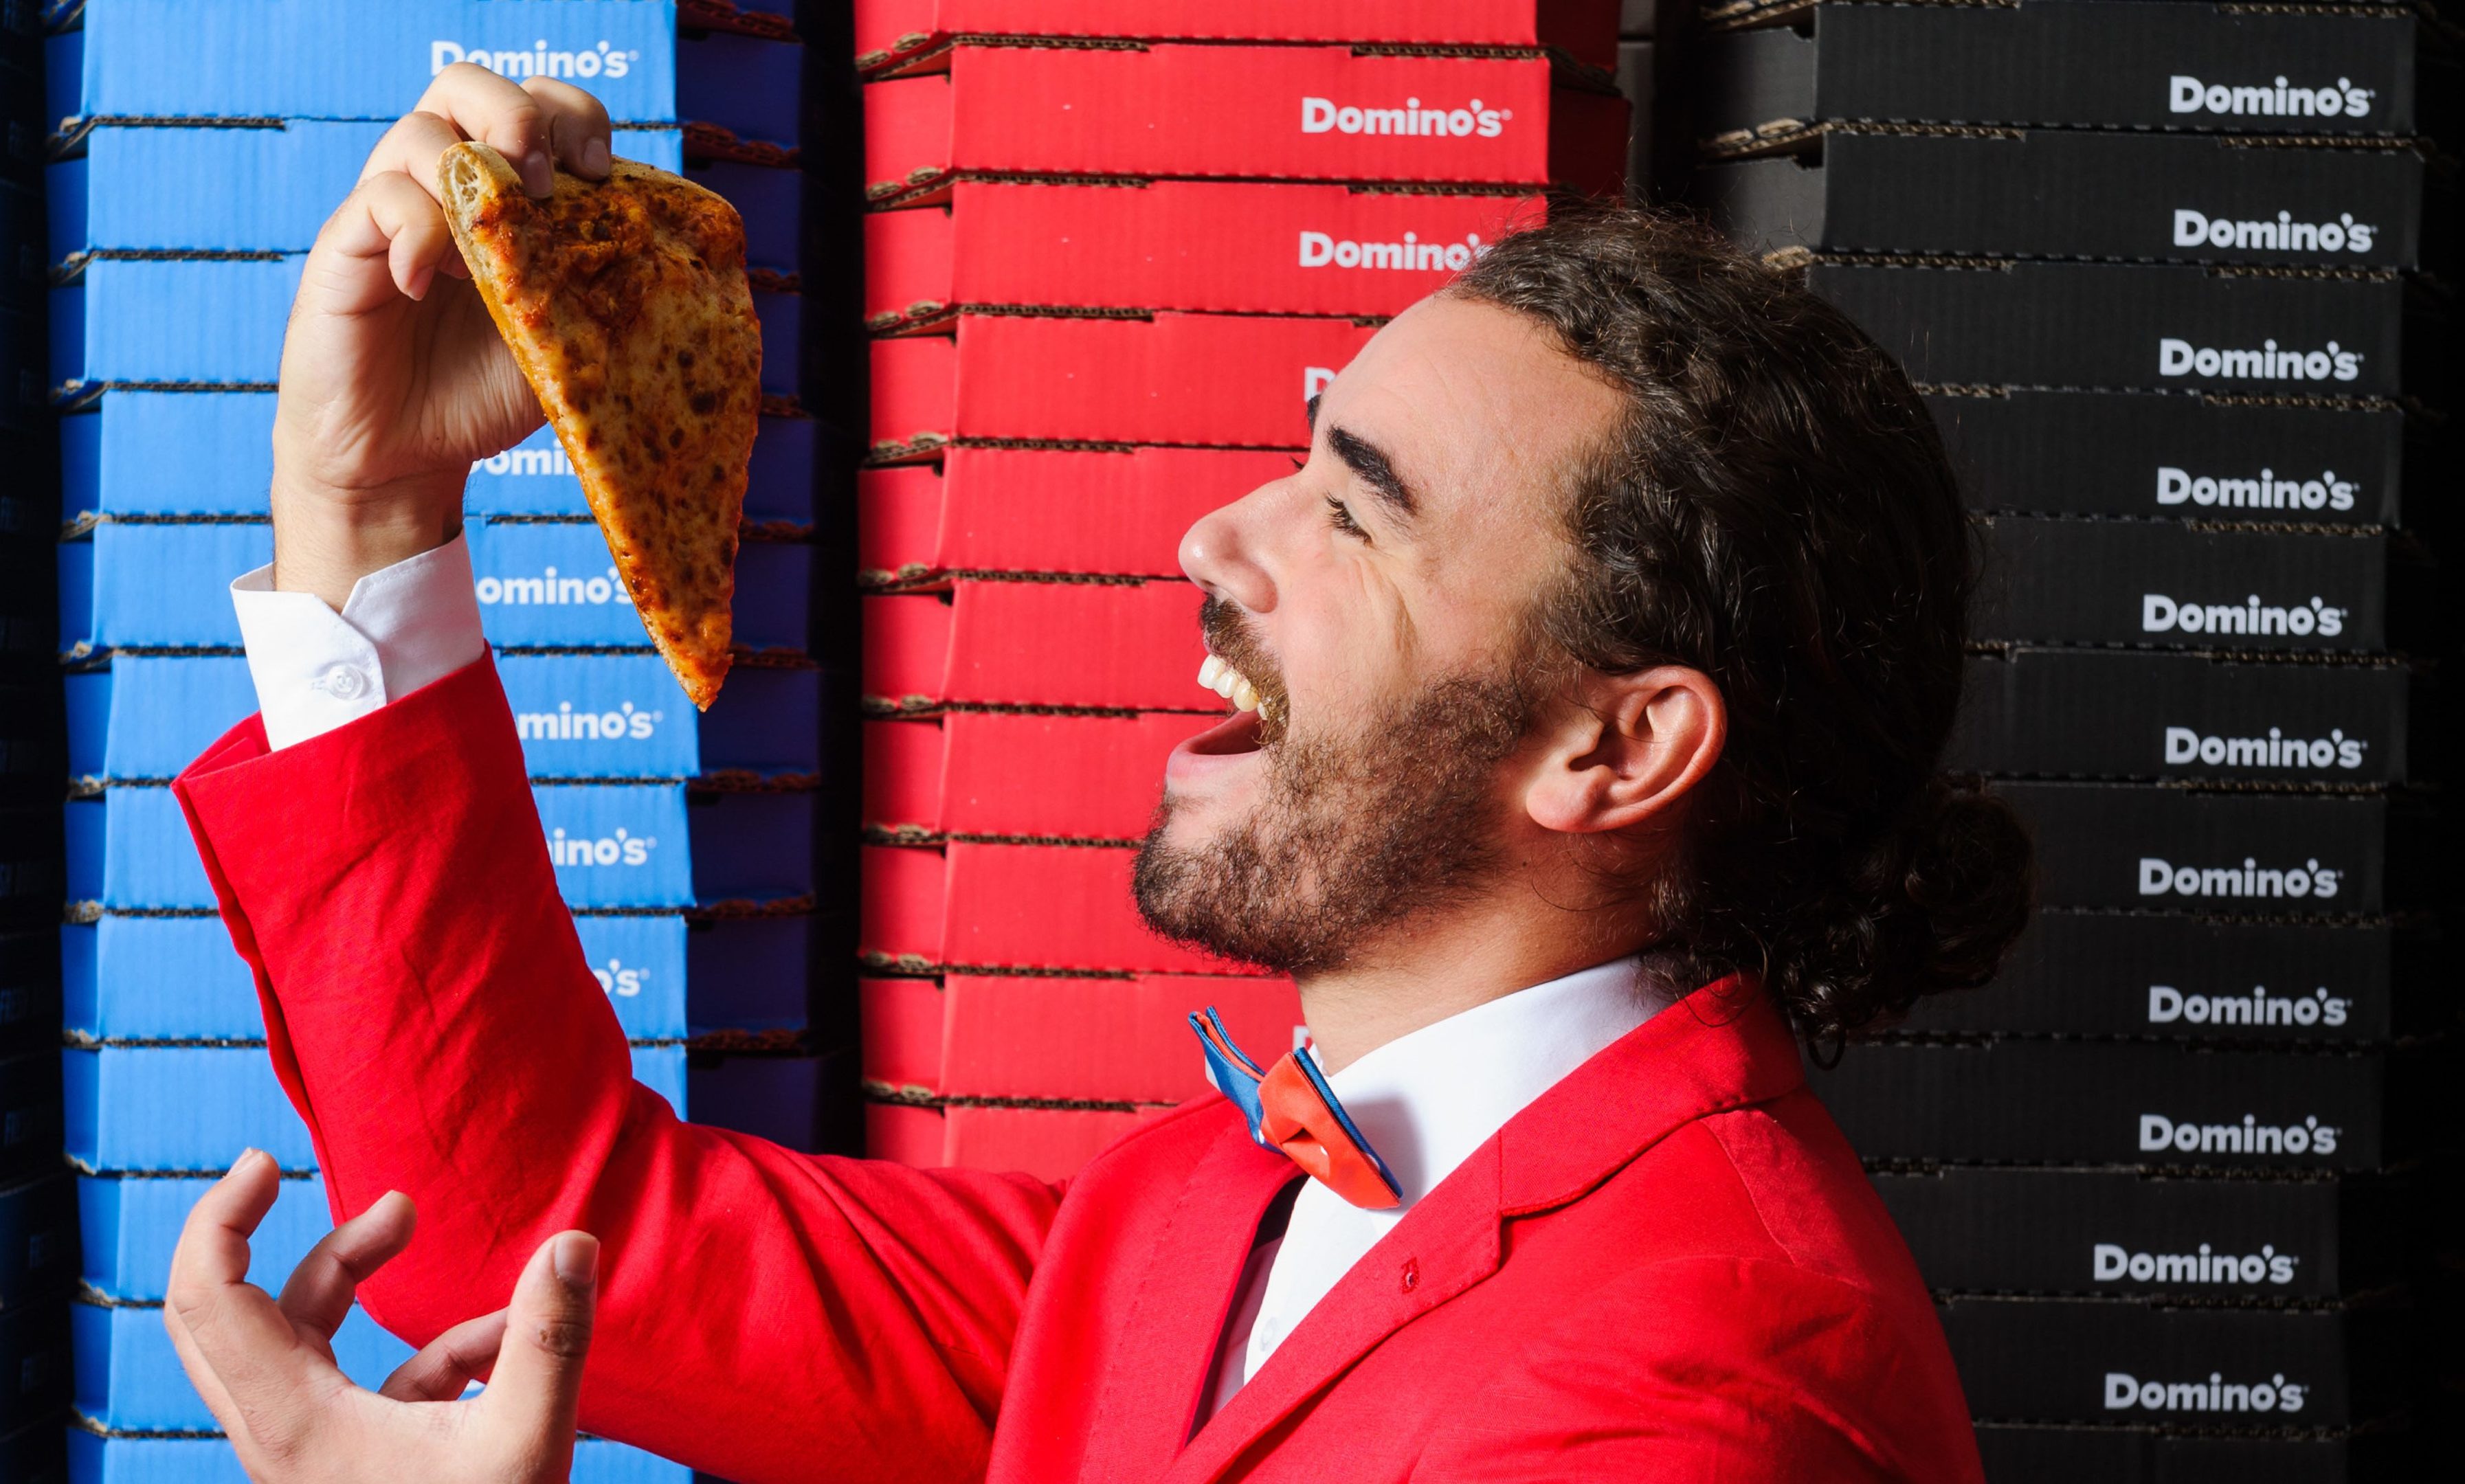 Domino’s is celebrating its 20th anniversary in Wales by giving away free pizza to anyone who sings their order around the country. The first 20 people to sing their order in every store across Wales will be rewarded with a free pizza. (James McCauley / Domino’s)